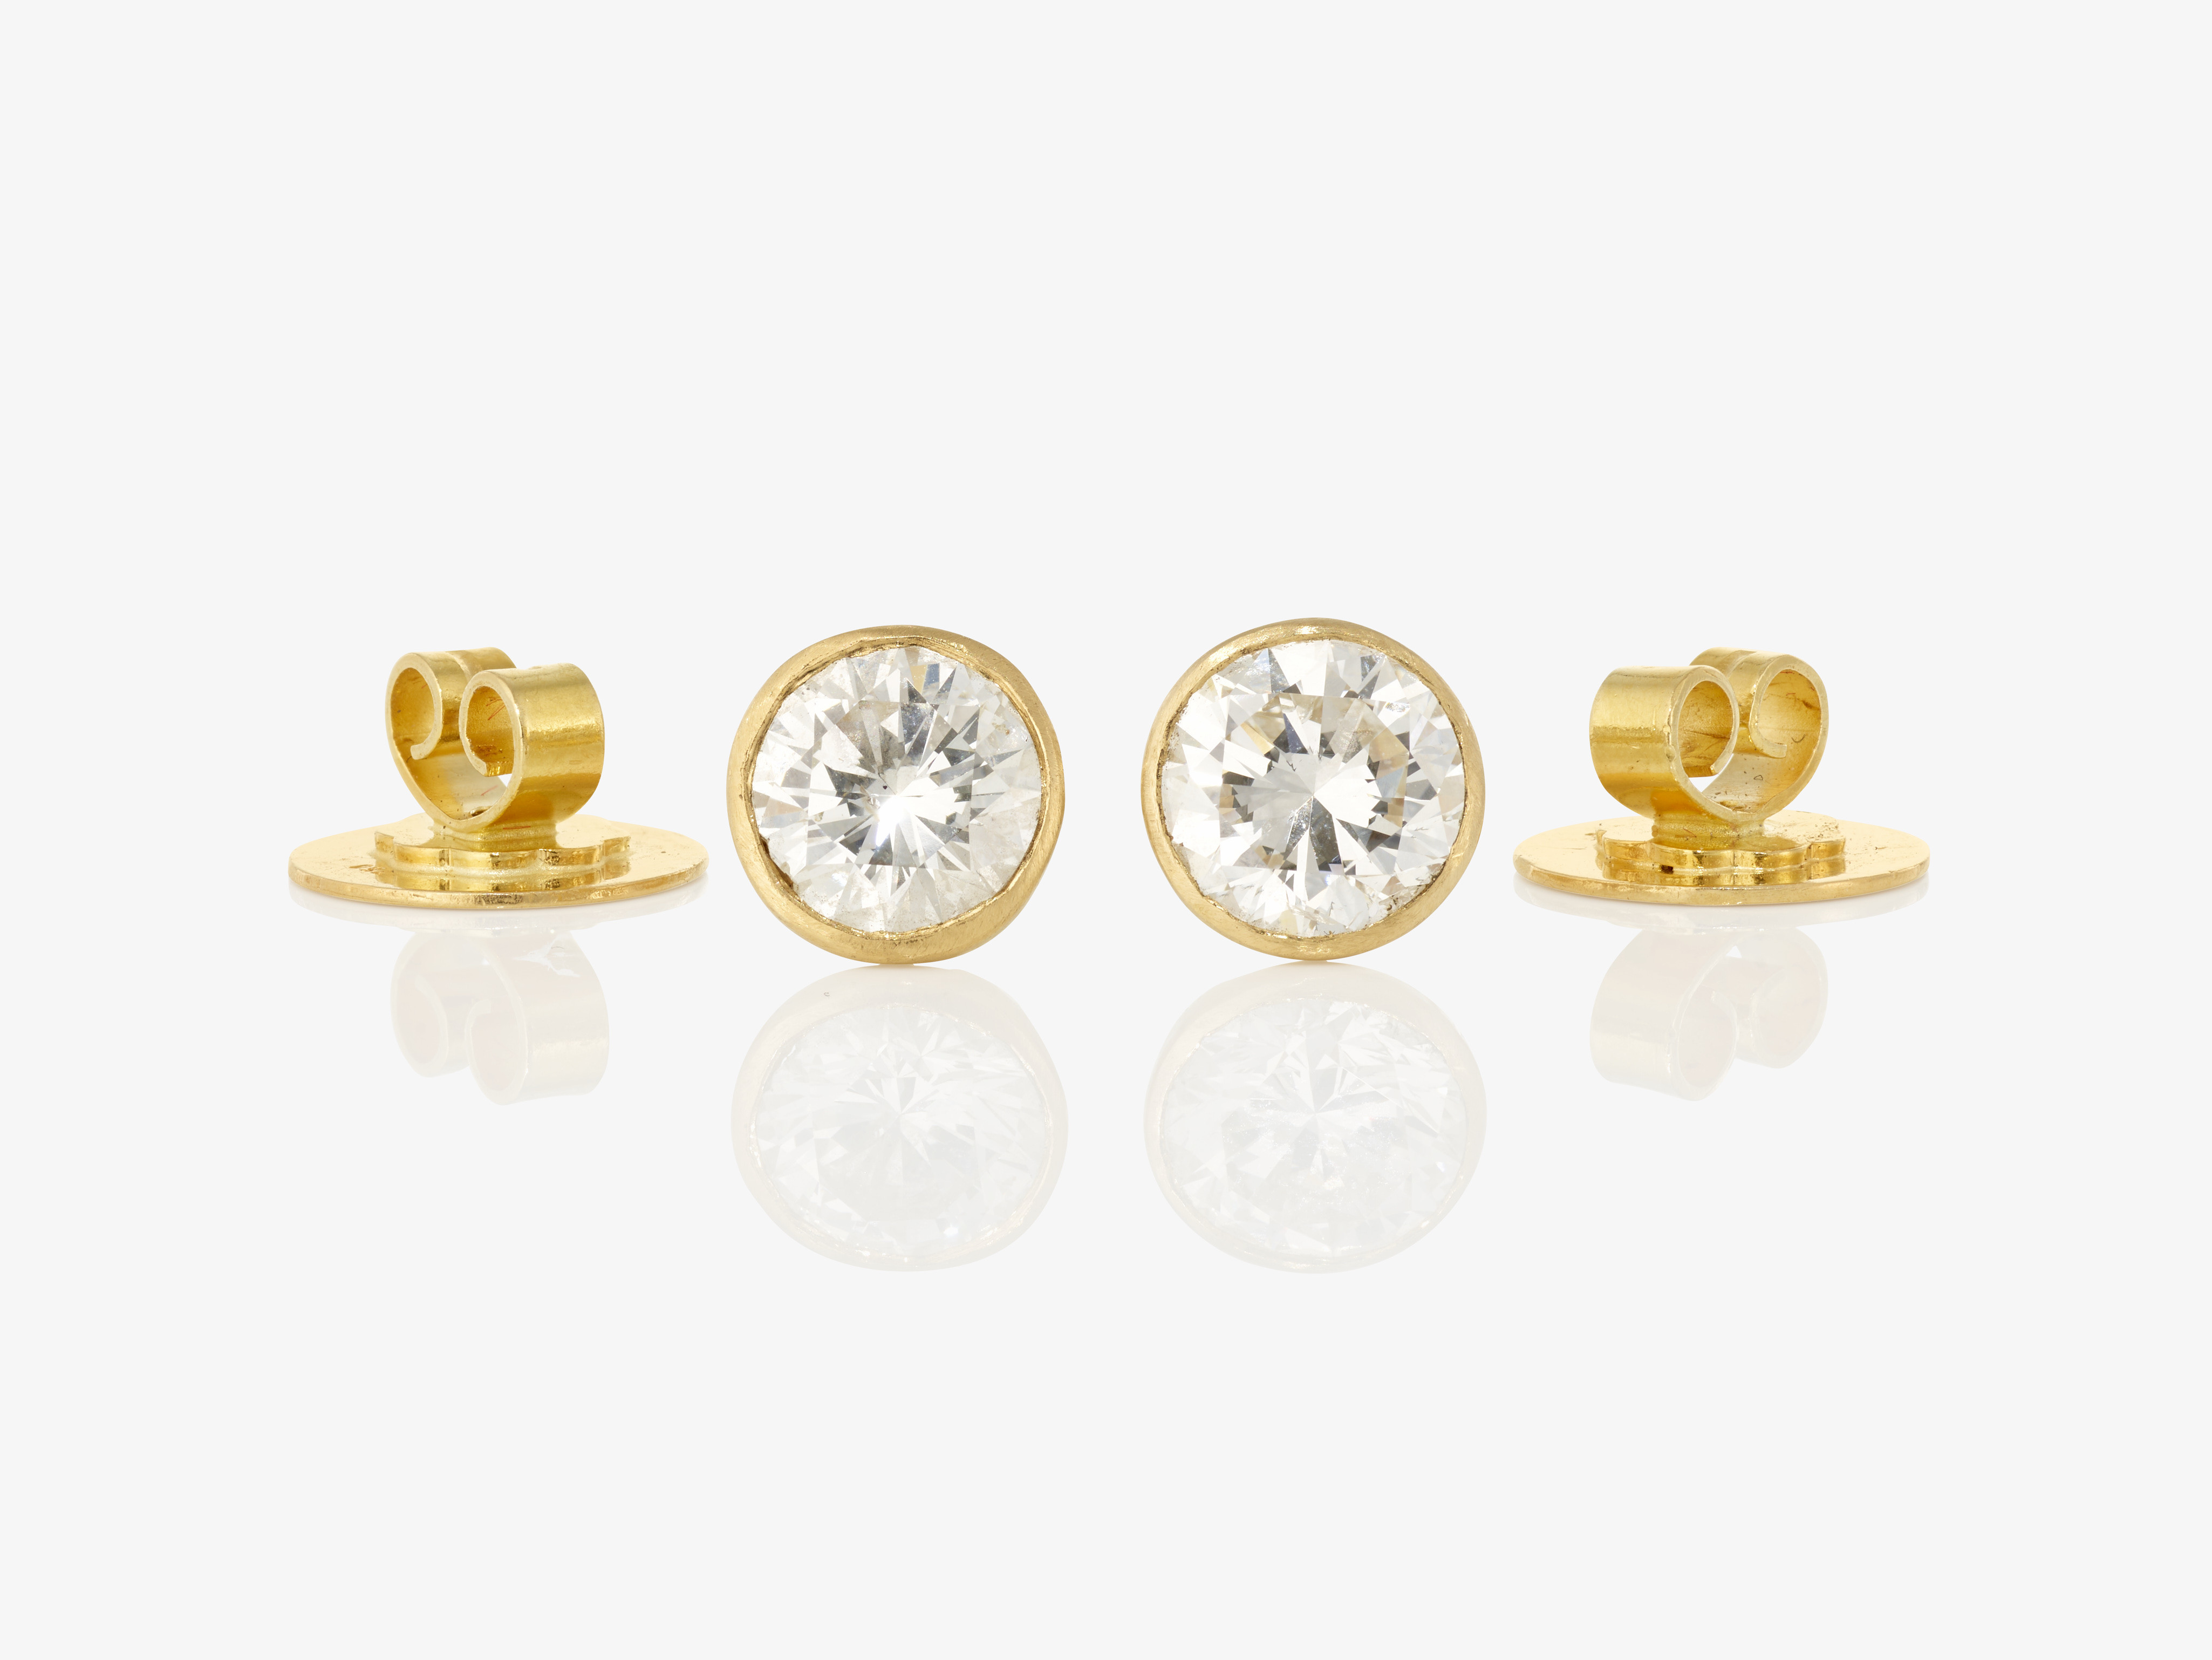 A pair of stud earrings decorated with brilliant-cut solitaire diamonds - Germany, 1996